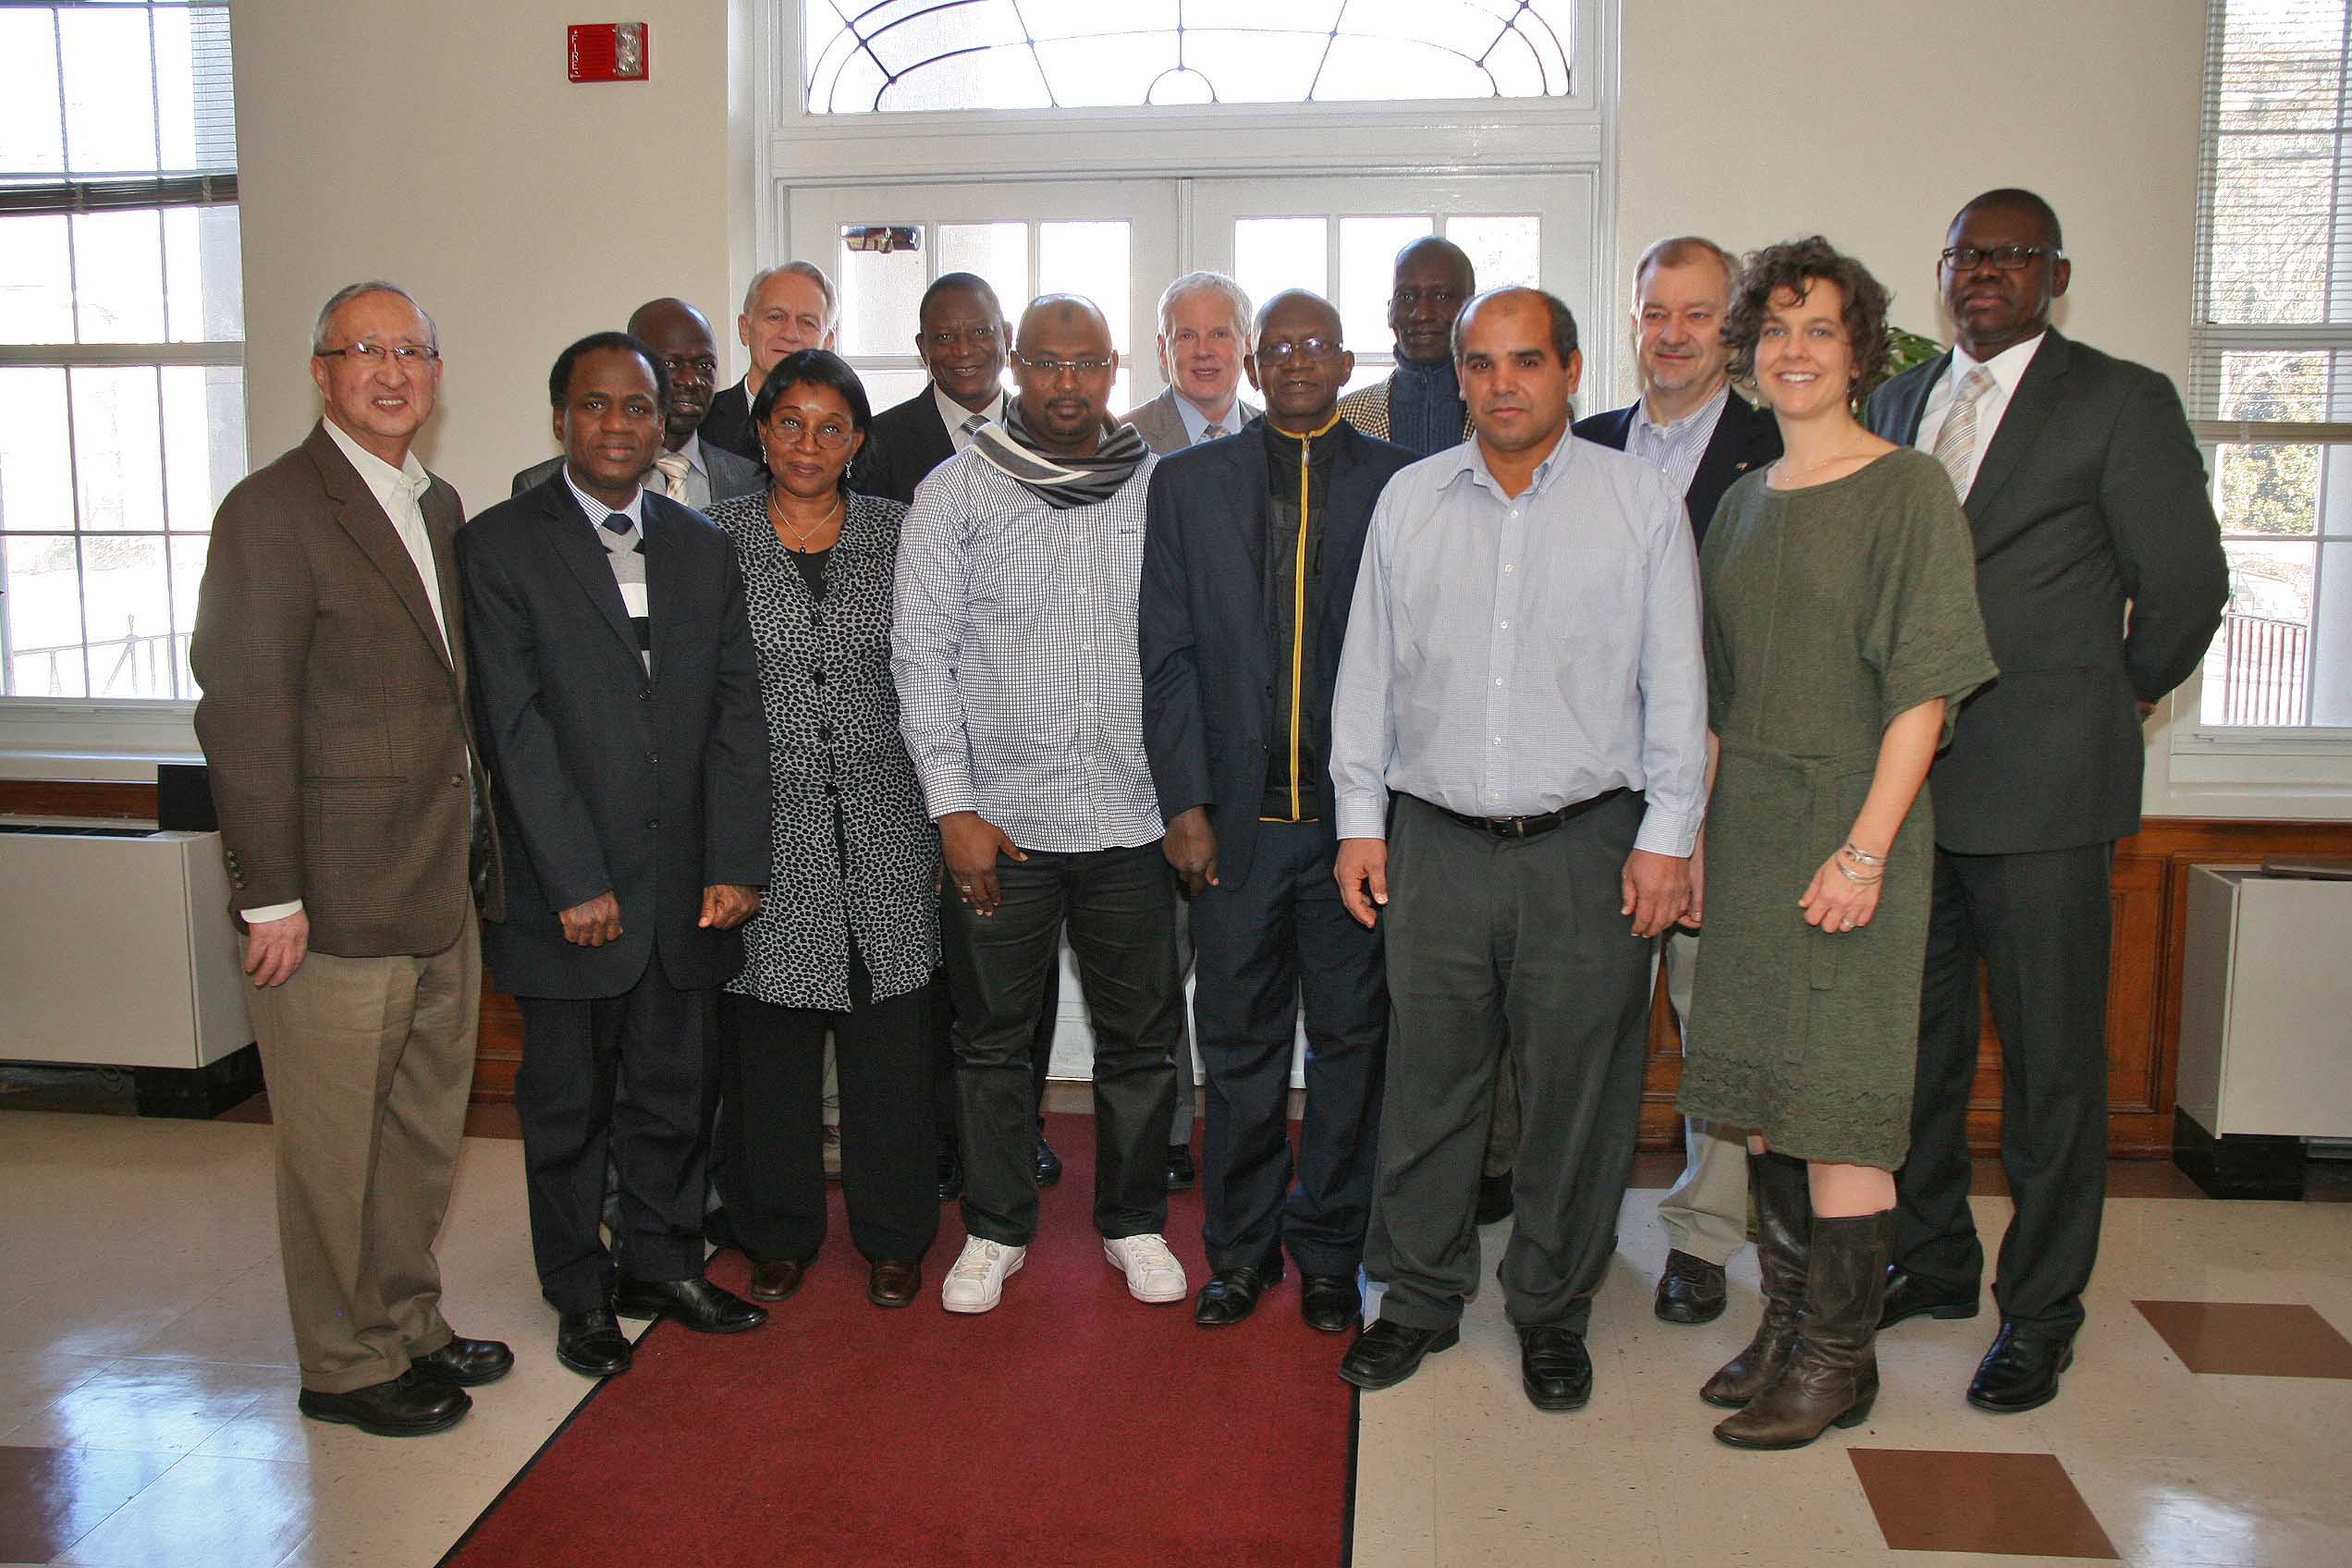 Ed Kanemasu,CAES assistant dean of international affairs and director of global programs; far left; and other UGA administrators hosted a delegation of animal health and agricultural experts from Mali in Athens from Wednesday to Friday this week. The visit represented the reestablishment of a relationship between the UGA College of Agricultural and Environmental Sciences  and the Malian government that started in 2006, but was interrupted when a coup toppled the Malian government in March 2012.